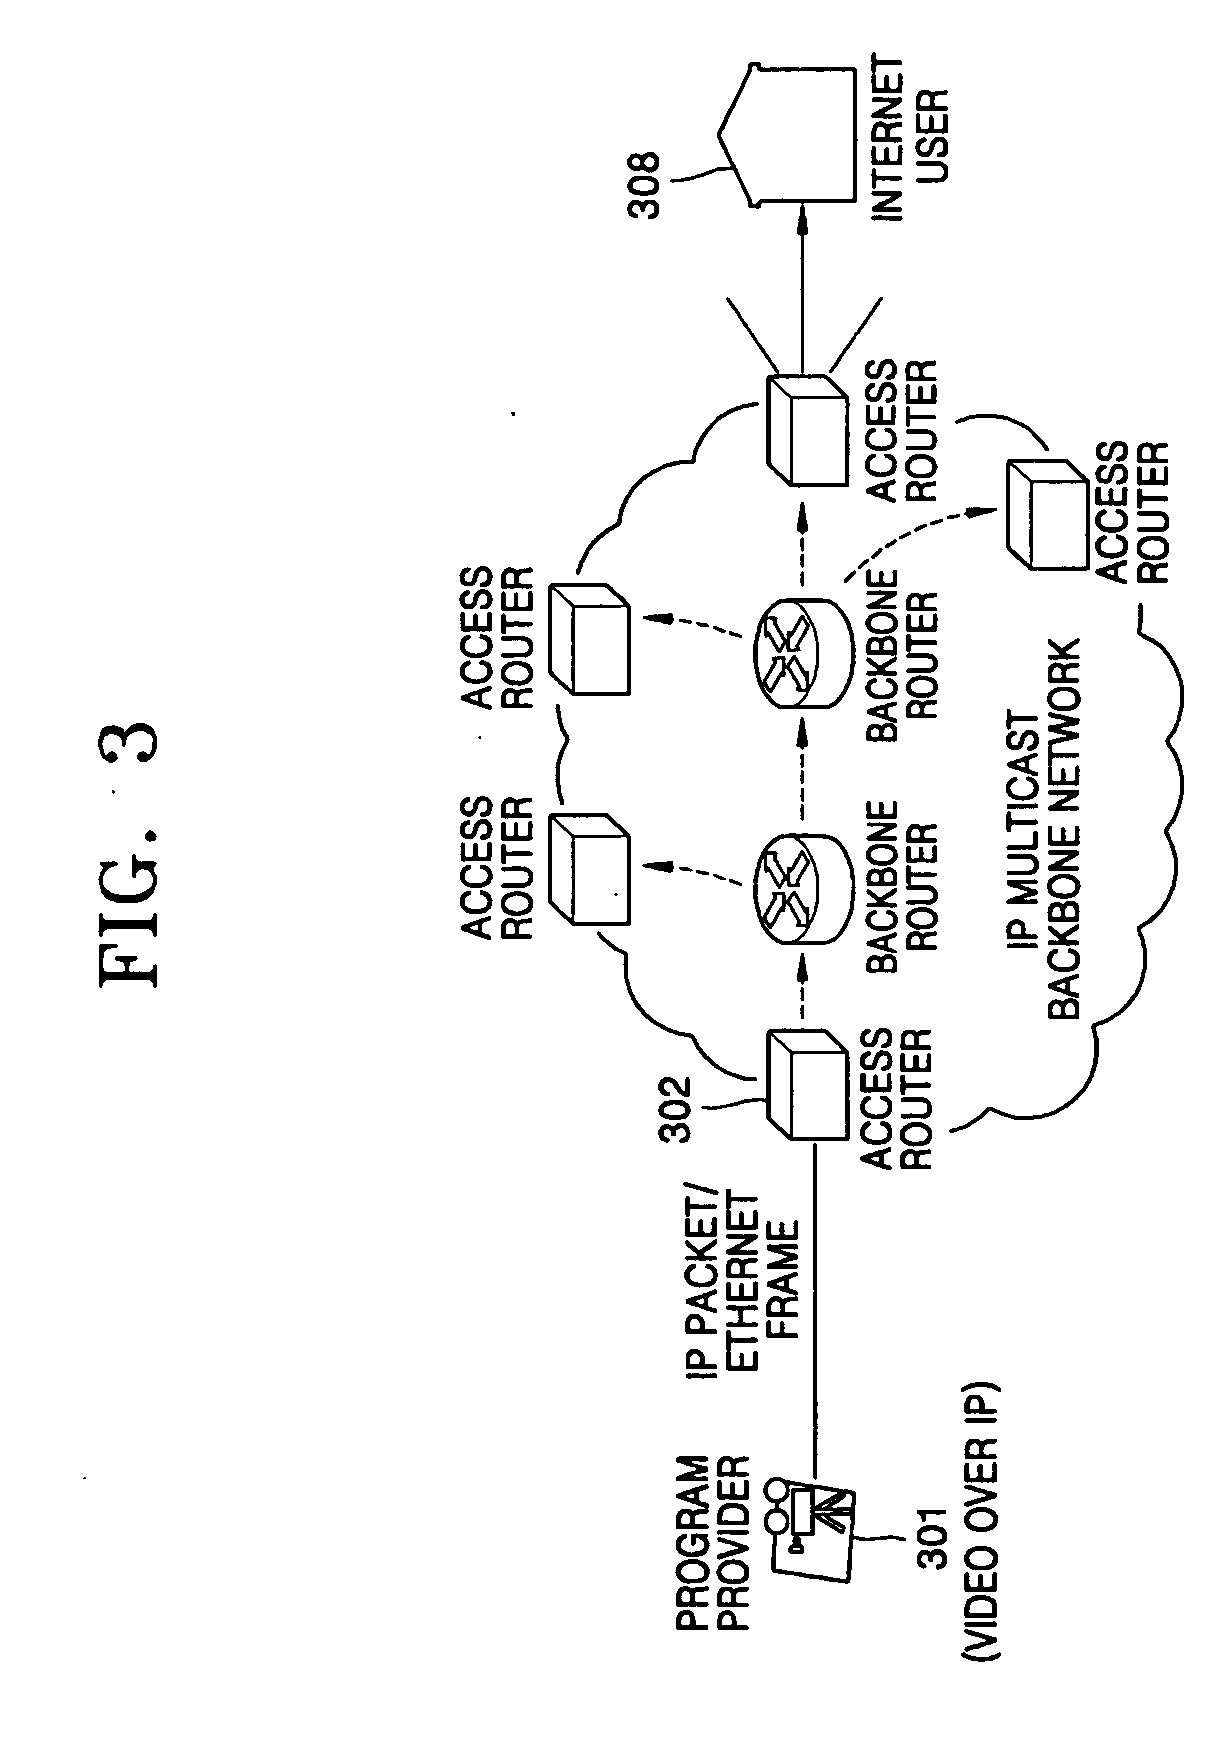 System and method of providing integrated communications and broadcasting service